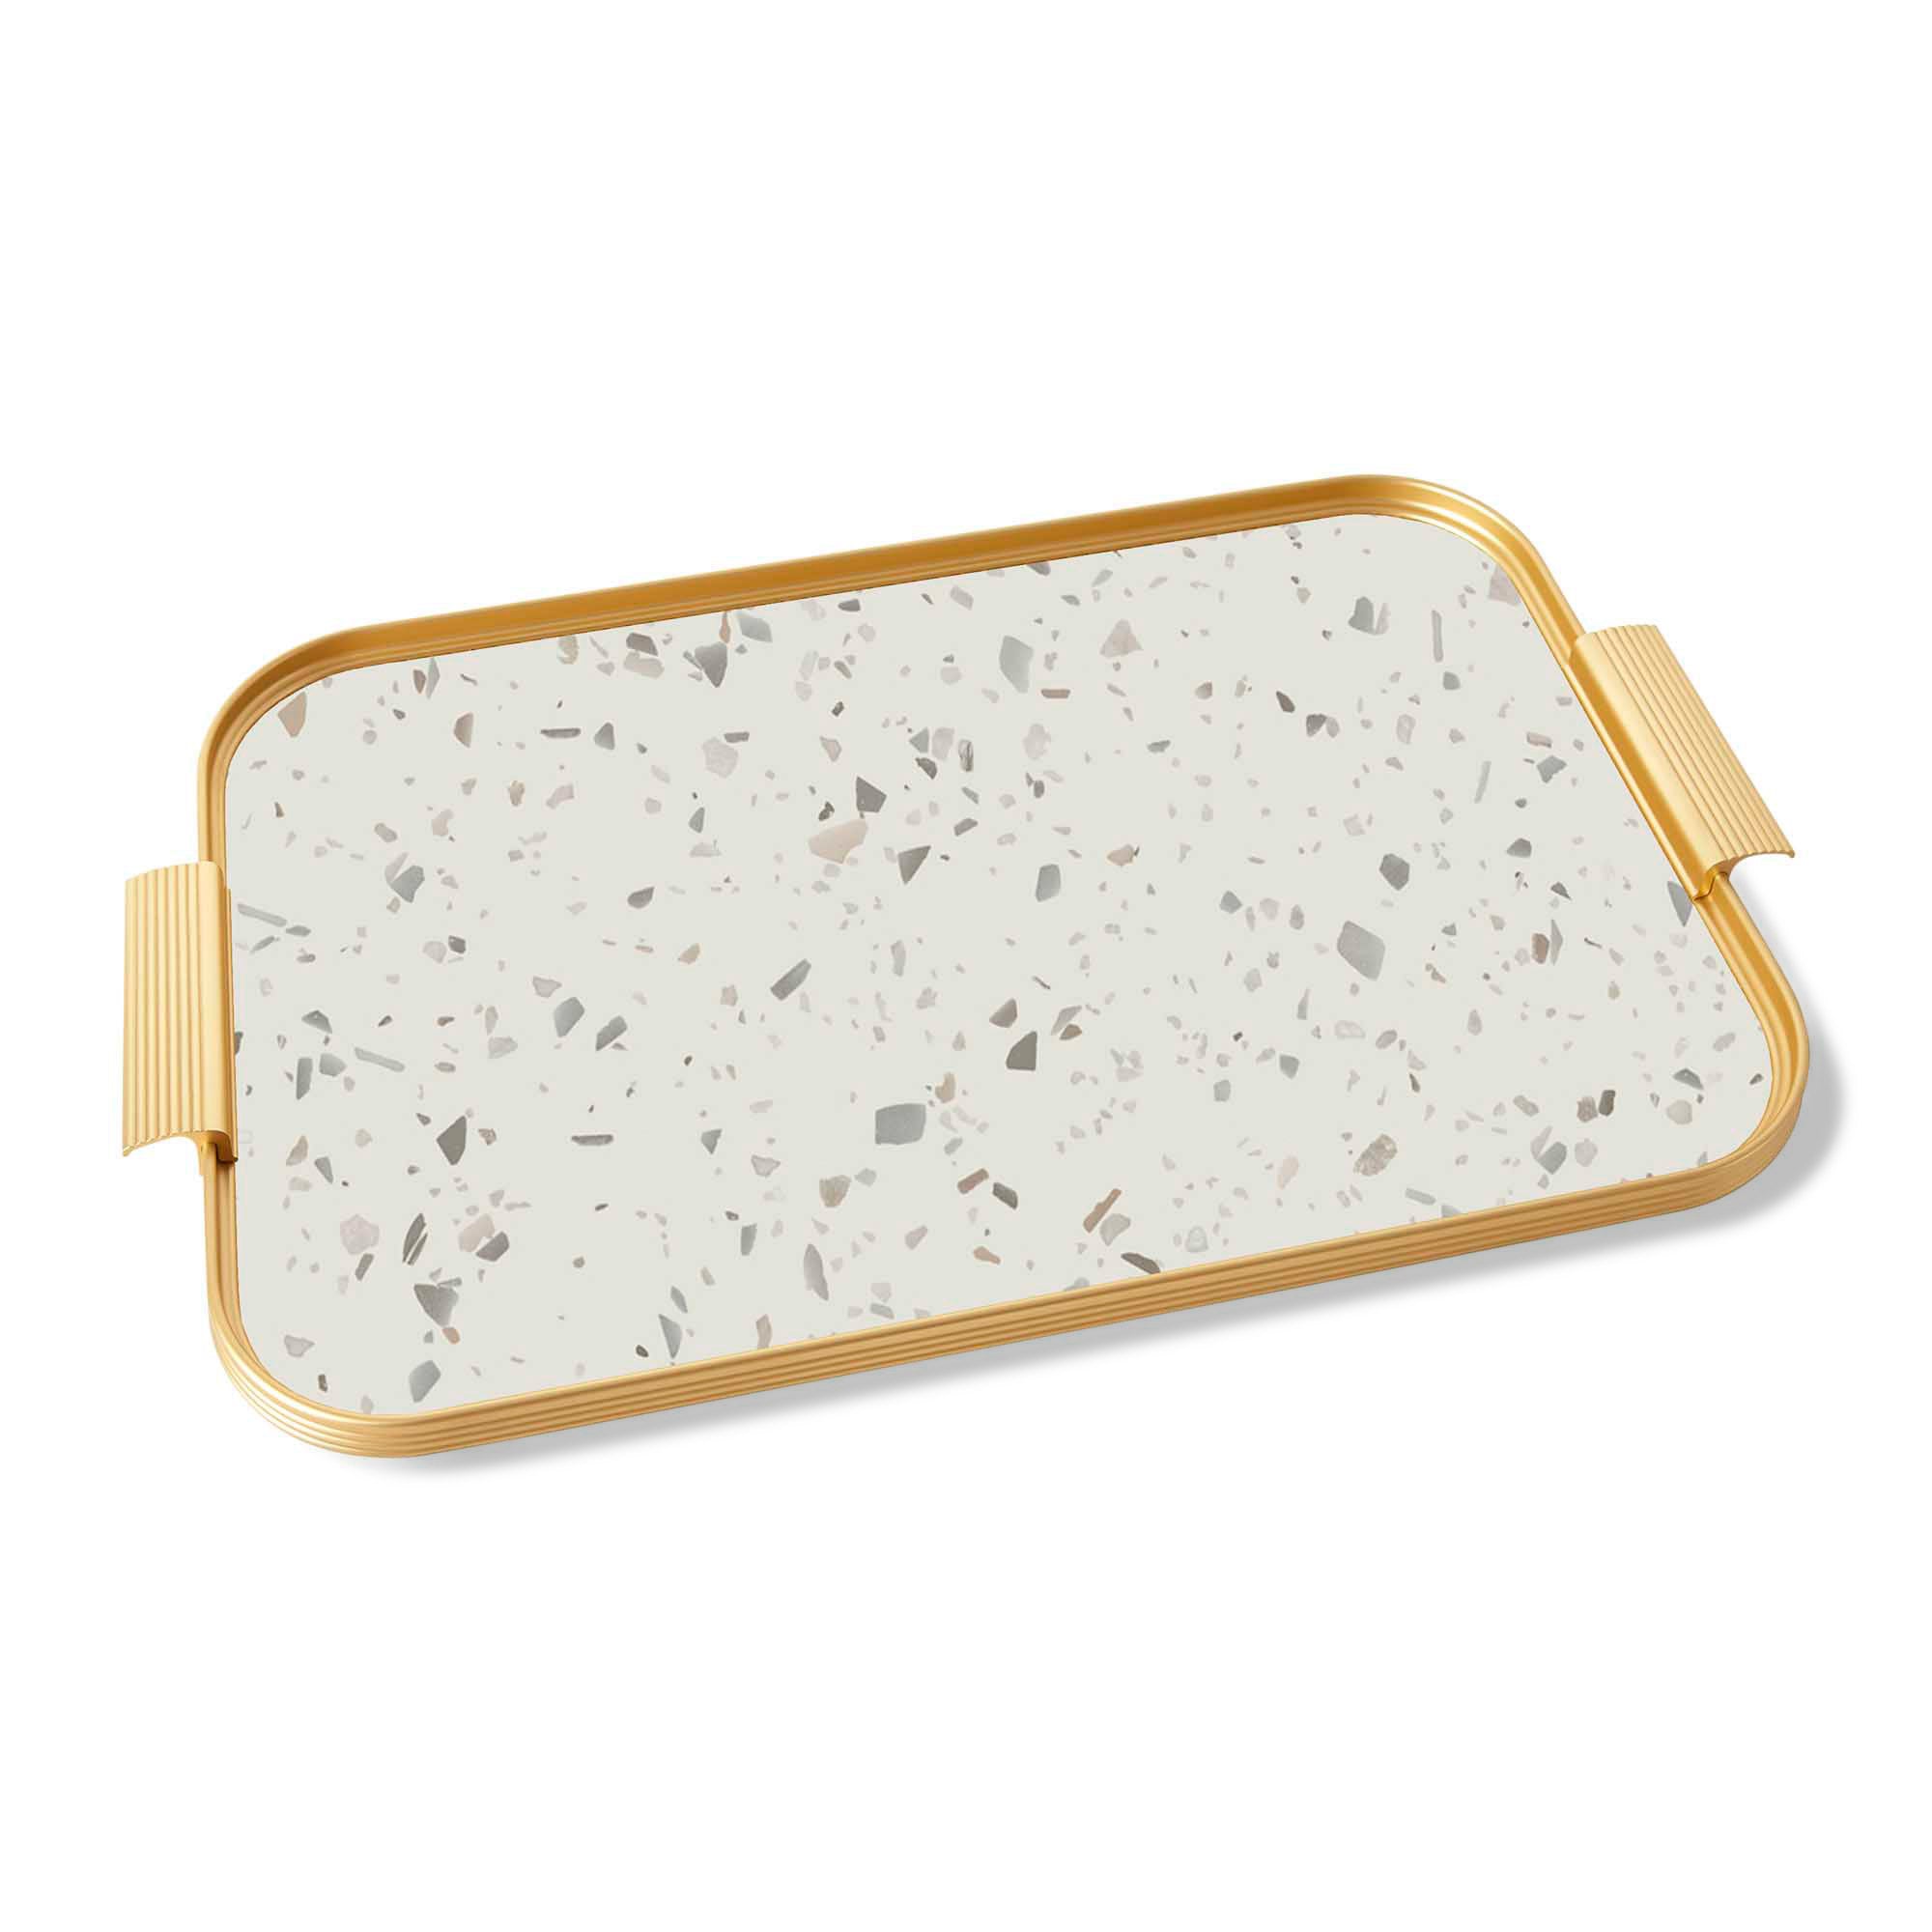 Ribbed Tray in Terrazzo and Gold - 18 Inch image 1